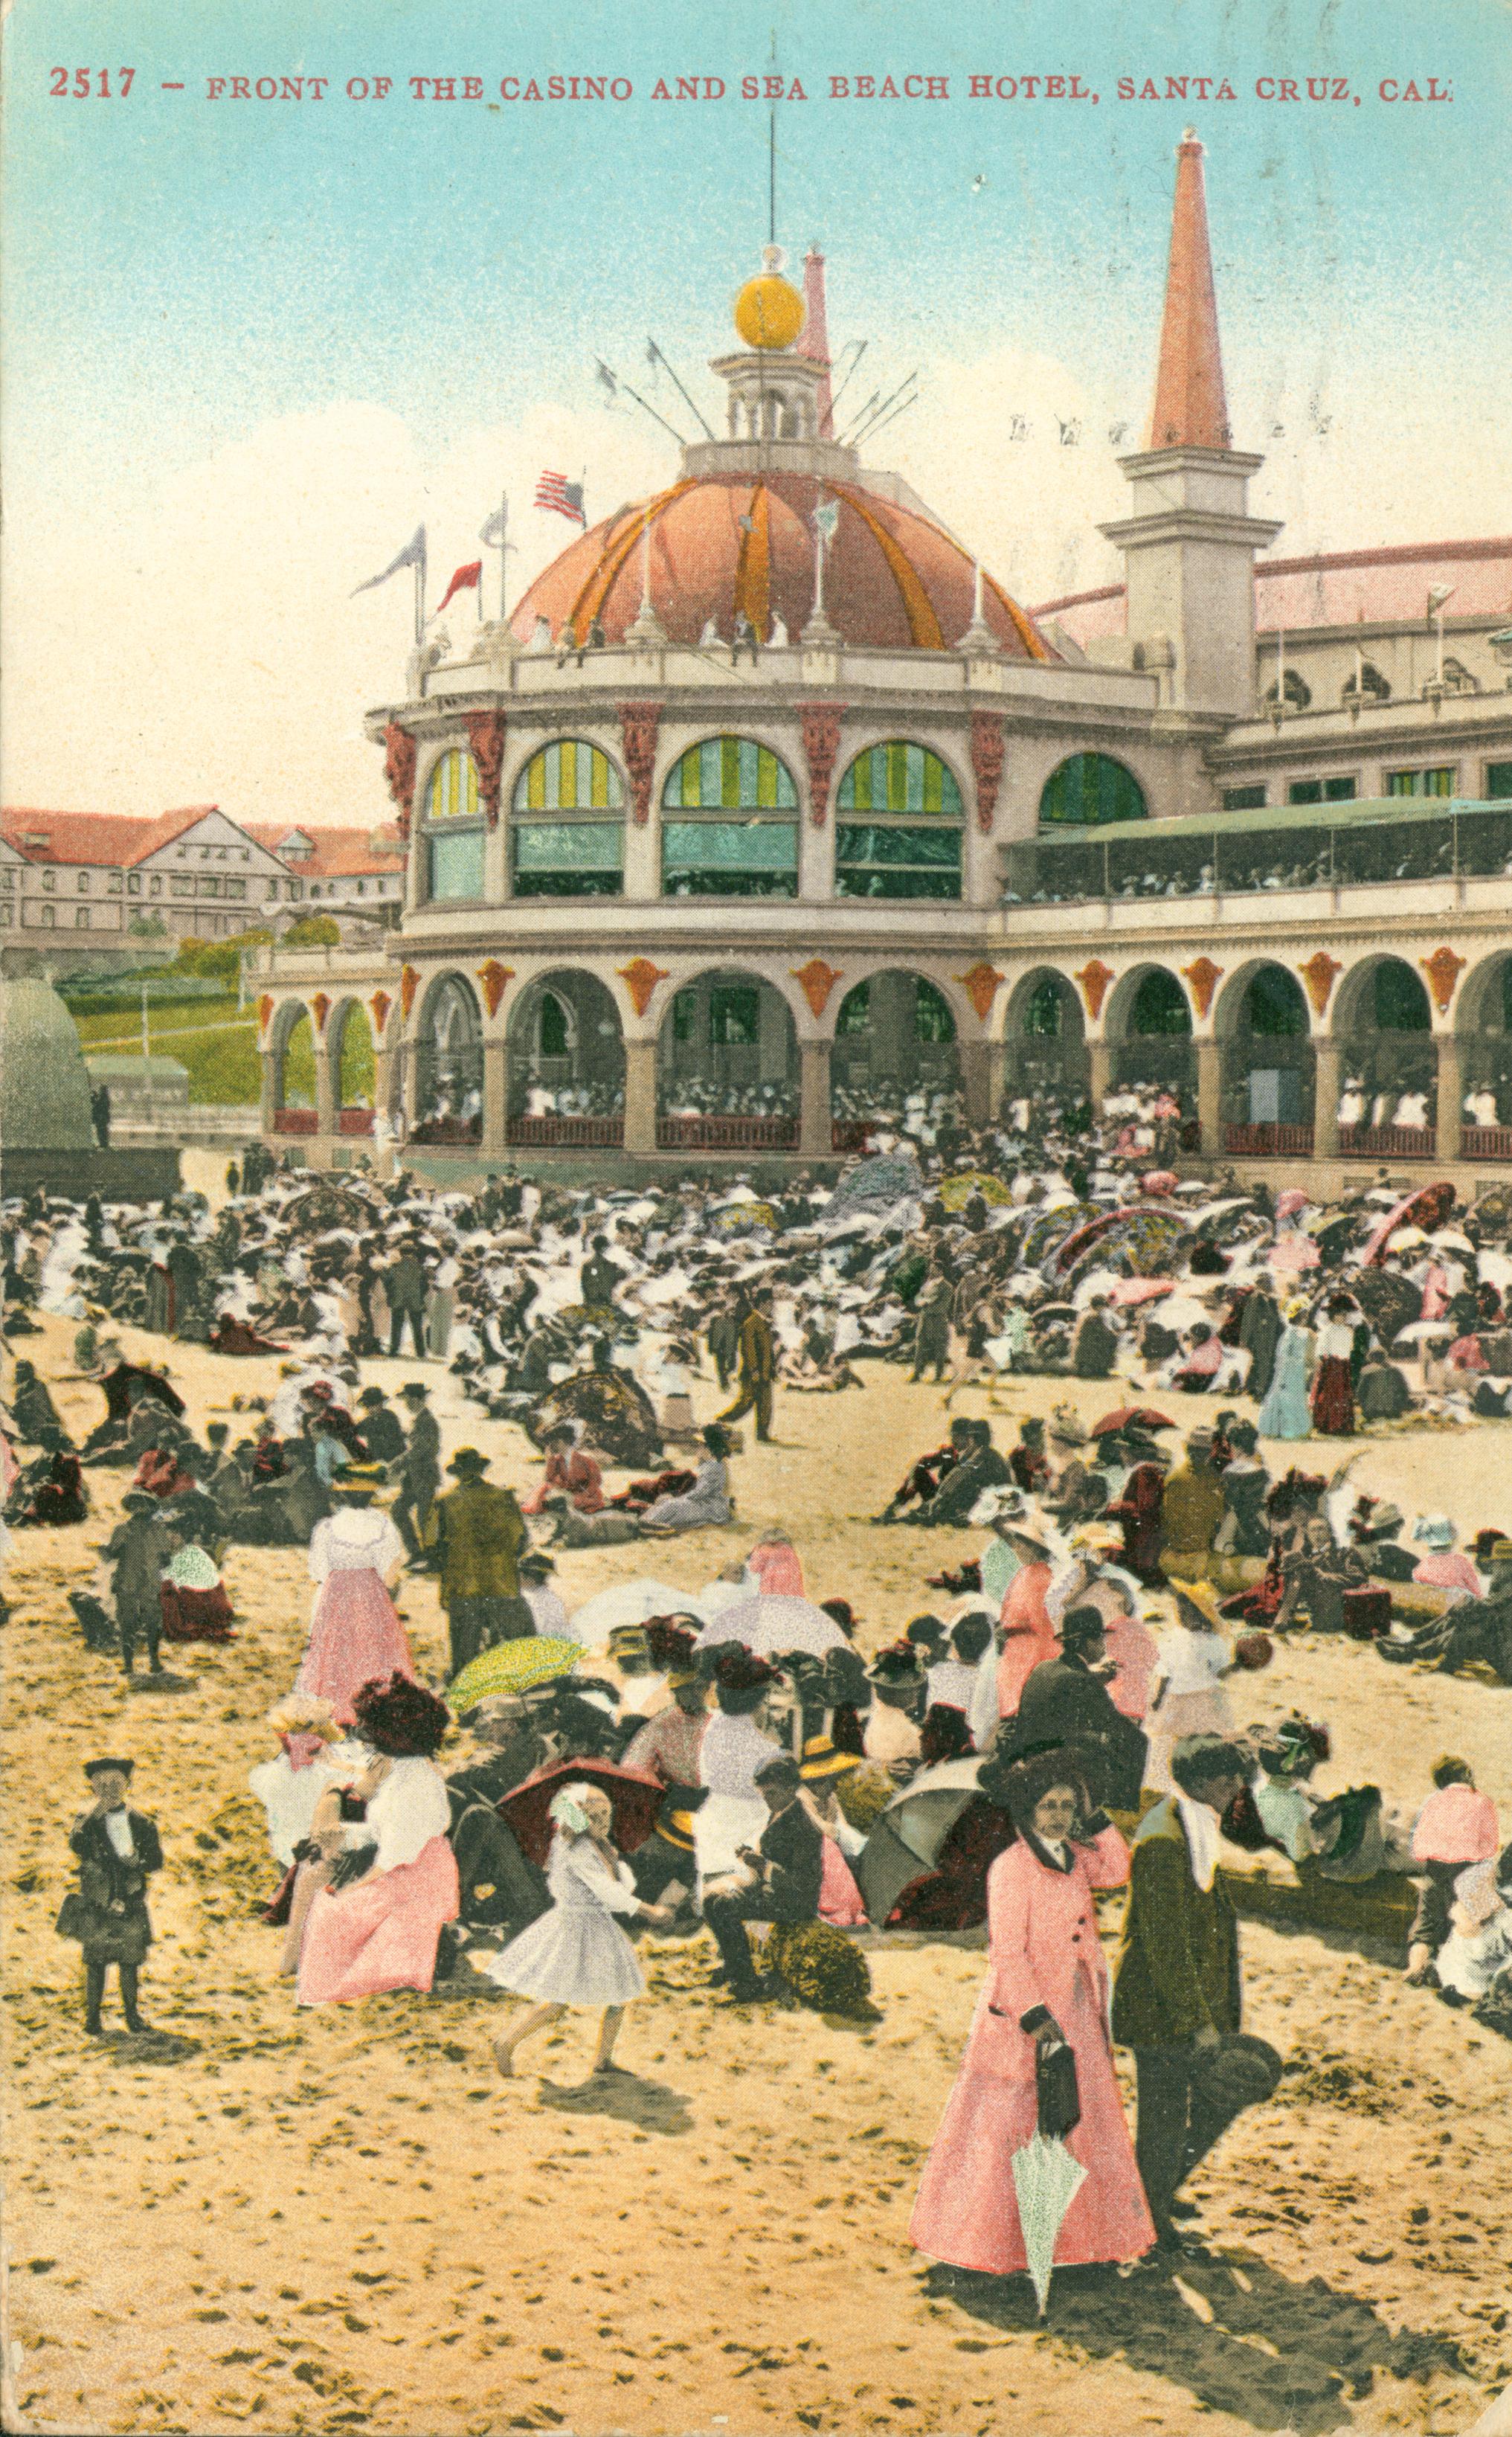 View of people sitting on the beach in front of the casino and Sea Beach Hotel, exterior view of buildings in background